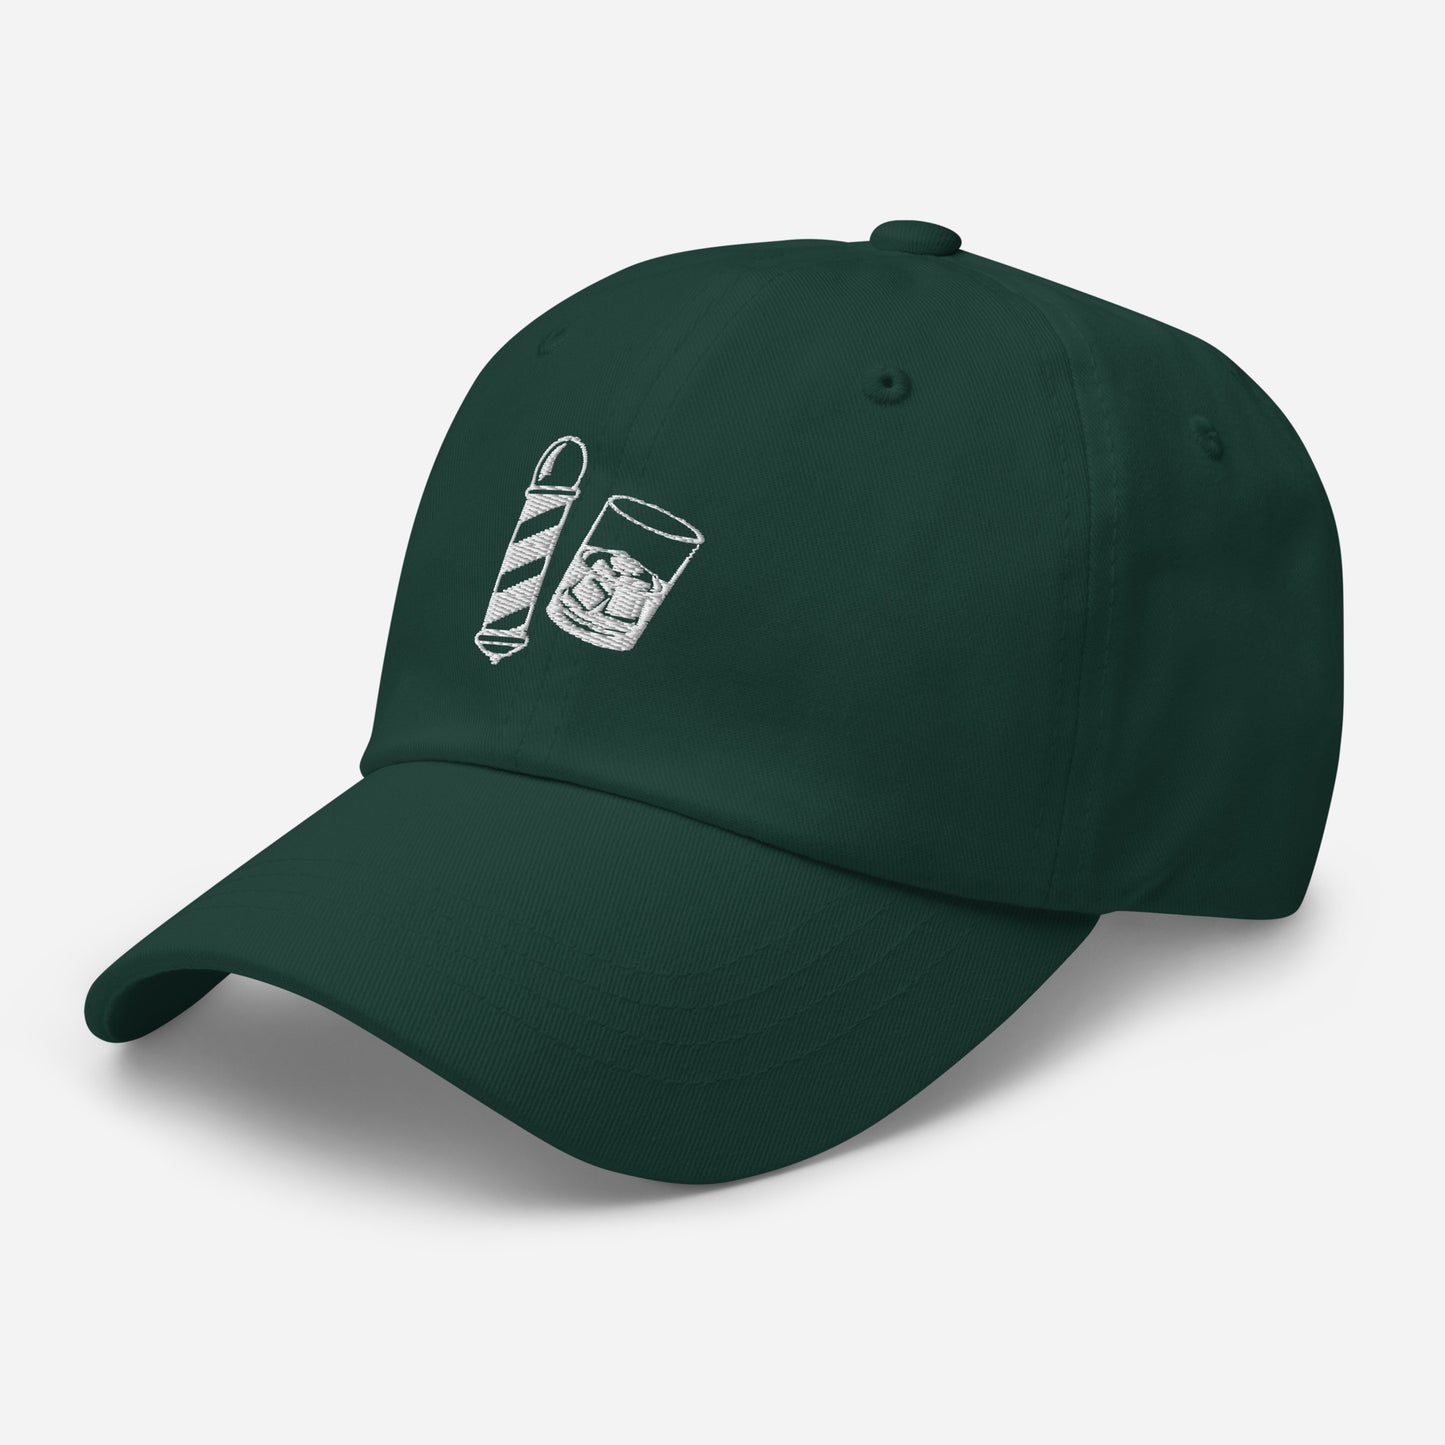 Barbershop & whiskey - Embroidered Dad hat